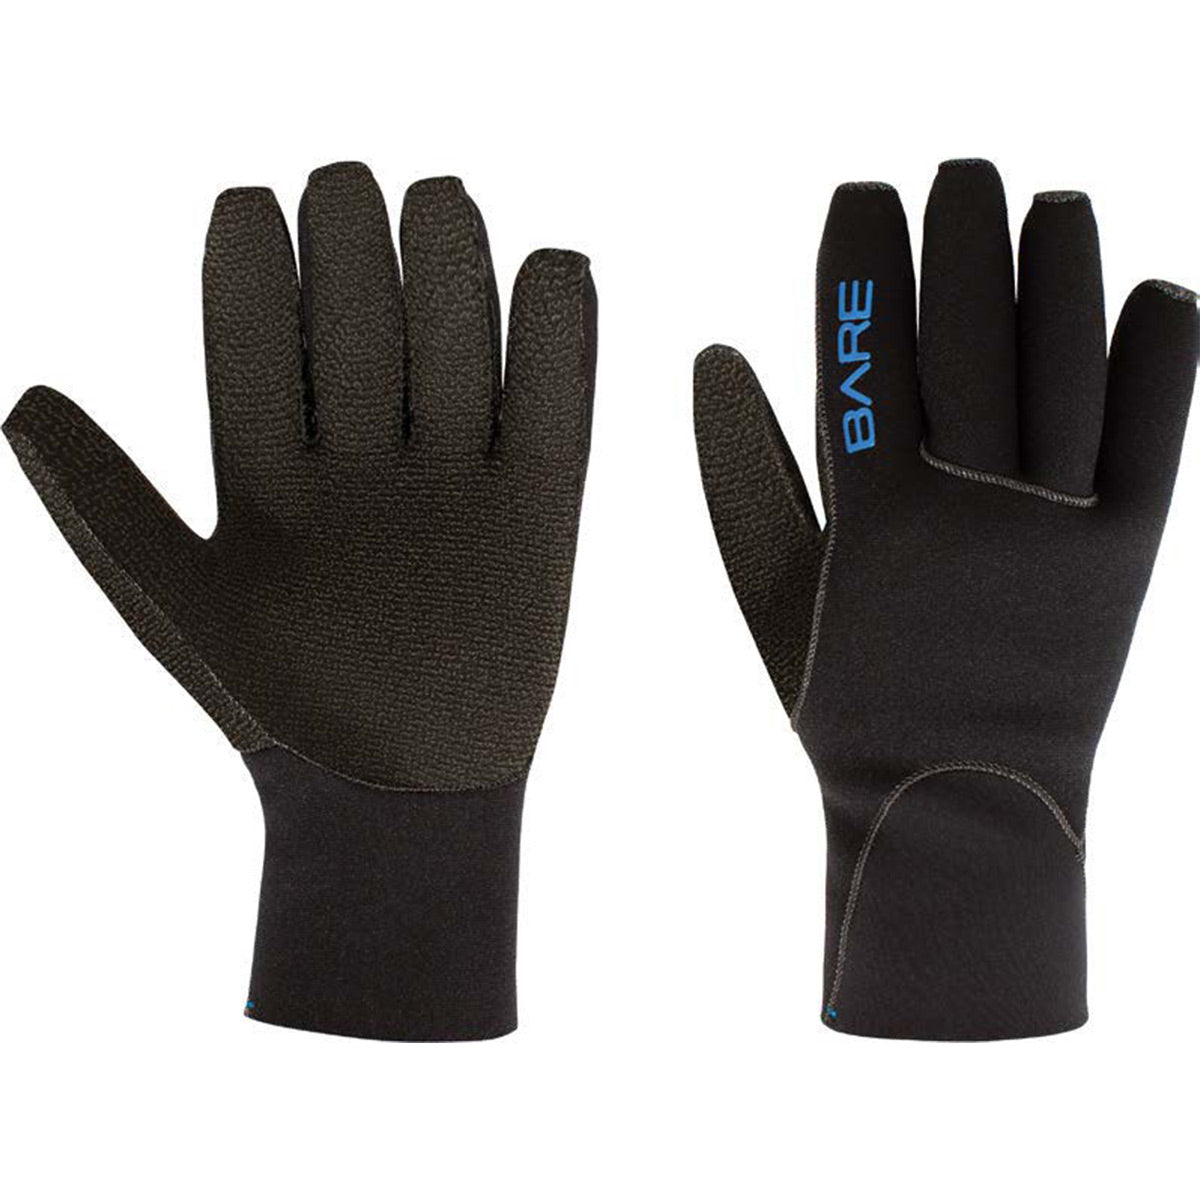 Bare 3 MM K-Palm Diving Glove